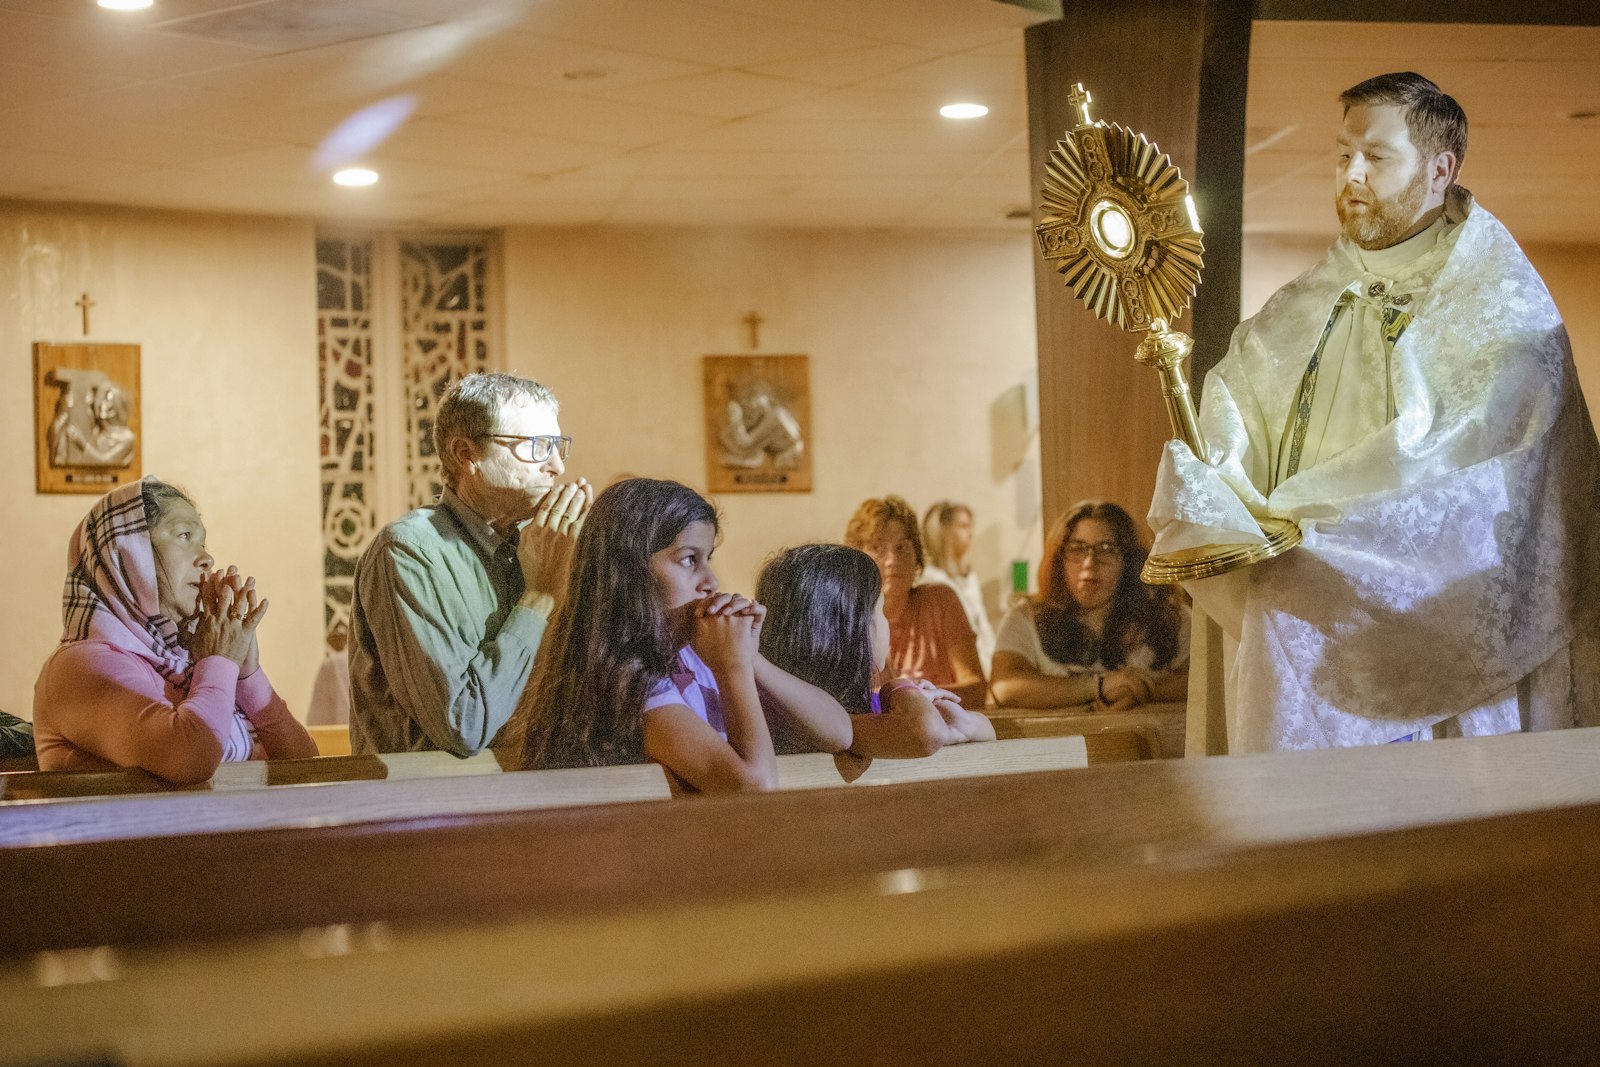 Fr. Stephen Pullis holds a monstrance containing the Blessed Sacrament blessing teens and adults gathered at St. Ronald Parish in Clinton Township as part of a special "Come, Encounter Christ" event Oct. 23. (Alissa Tuttle | Special to Detroit Catholic)